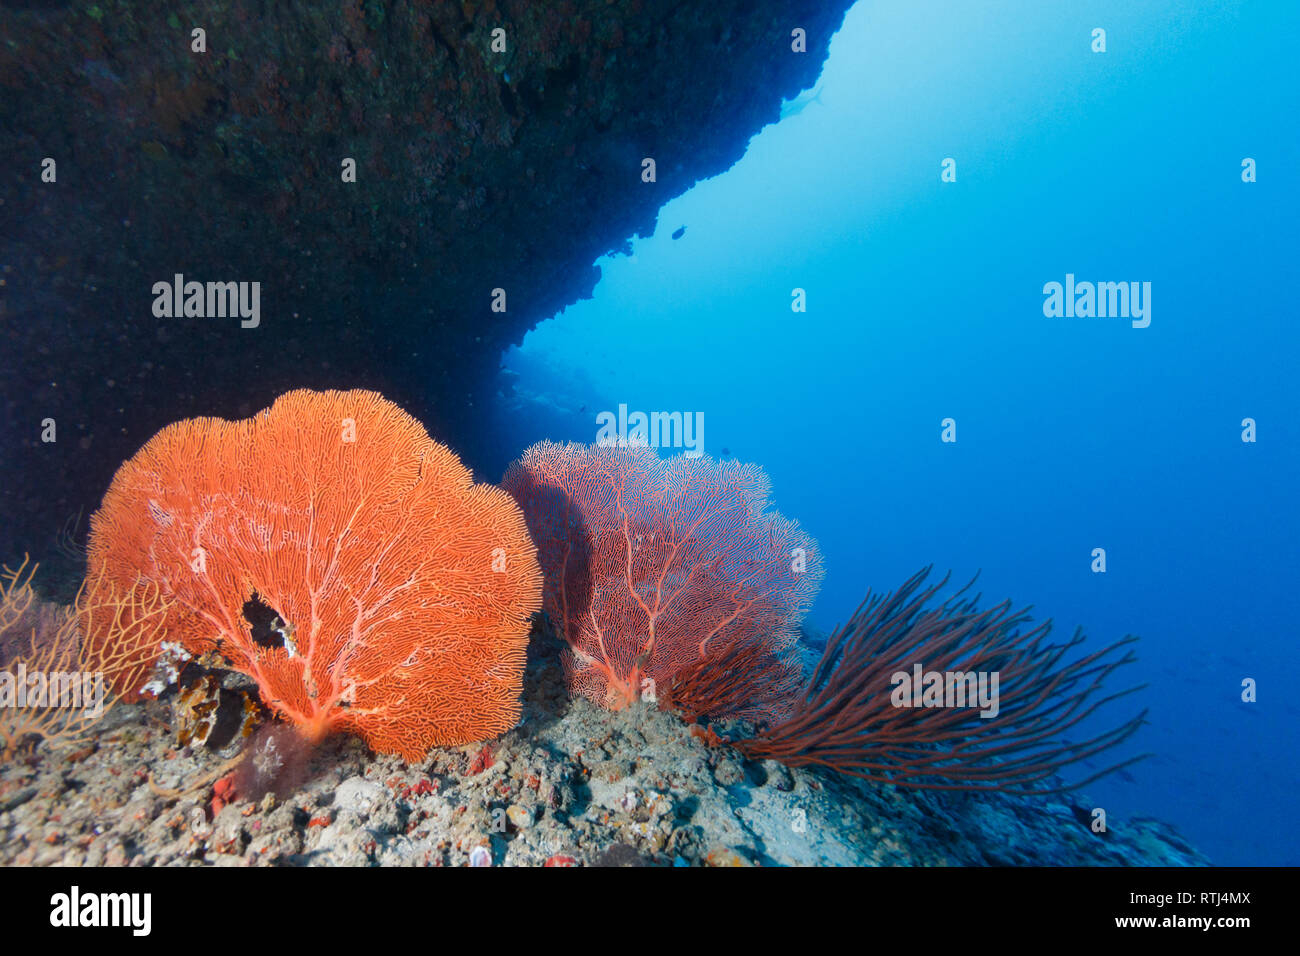 orange-sea-fan-and-branching-coral-spotlighted-under-coral-cliff-stock